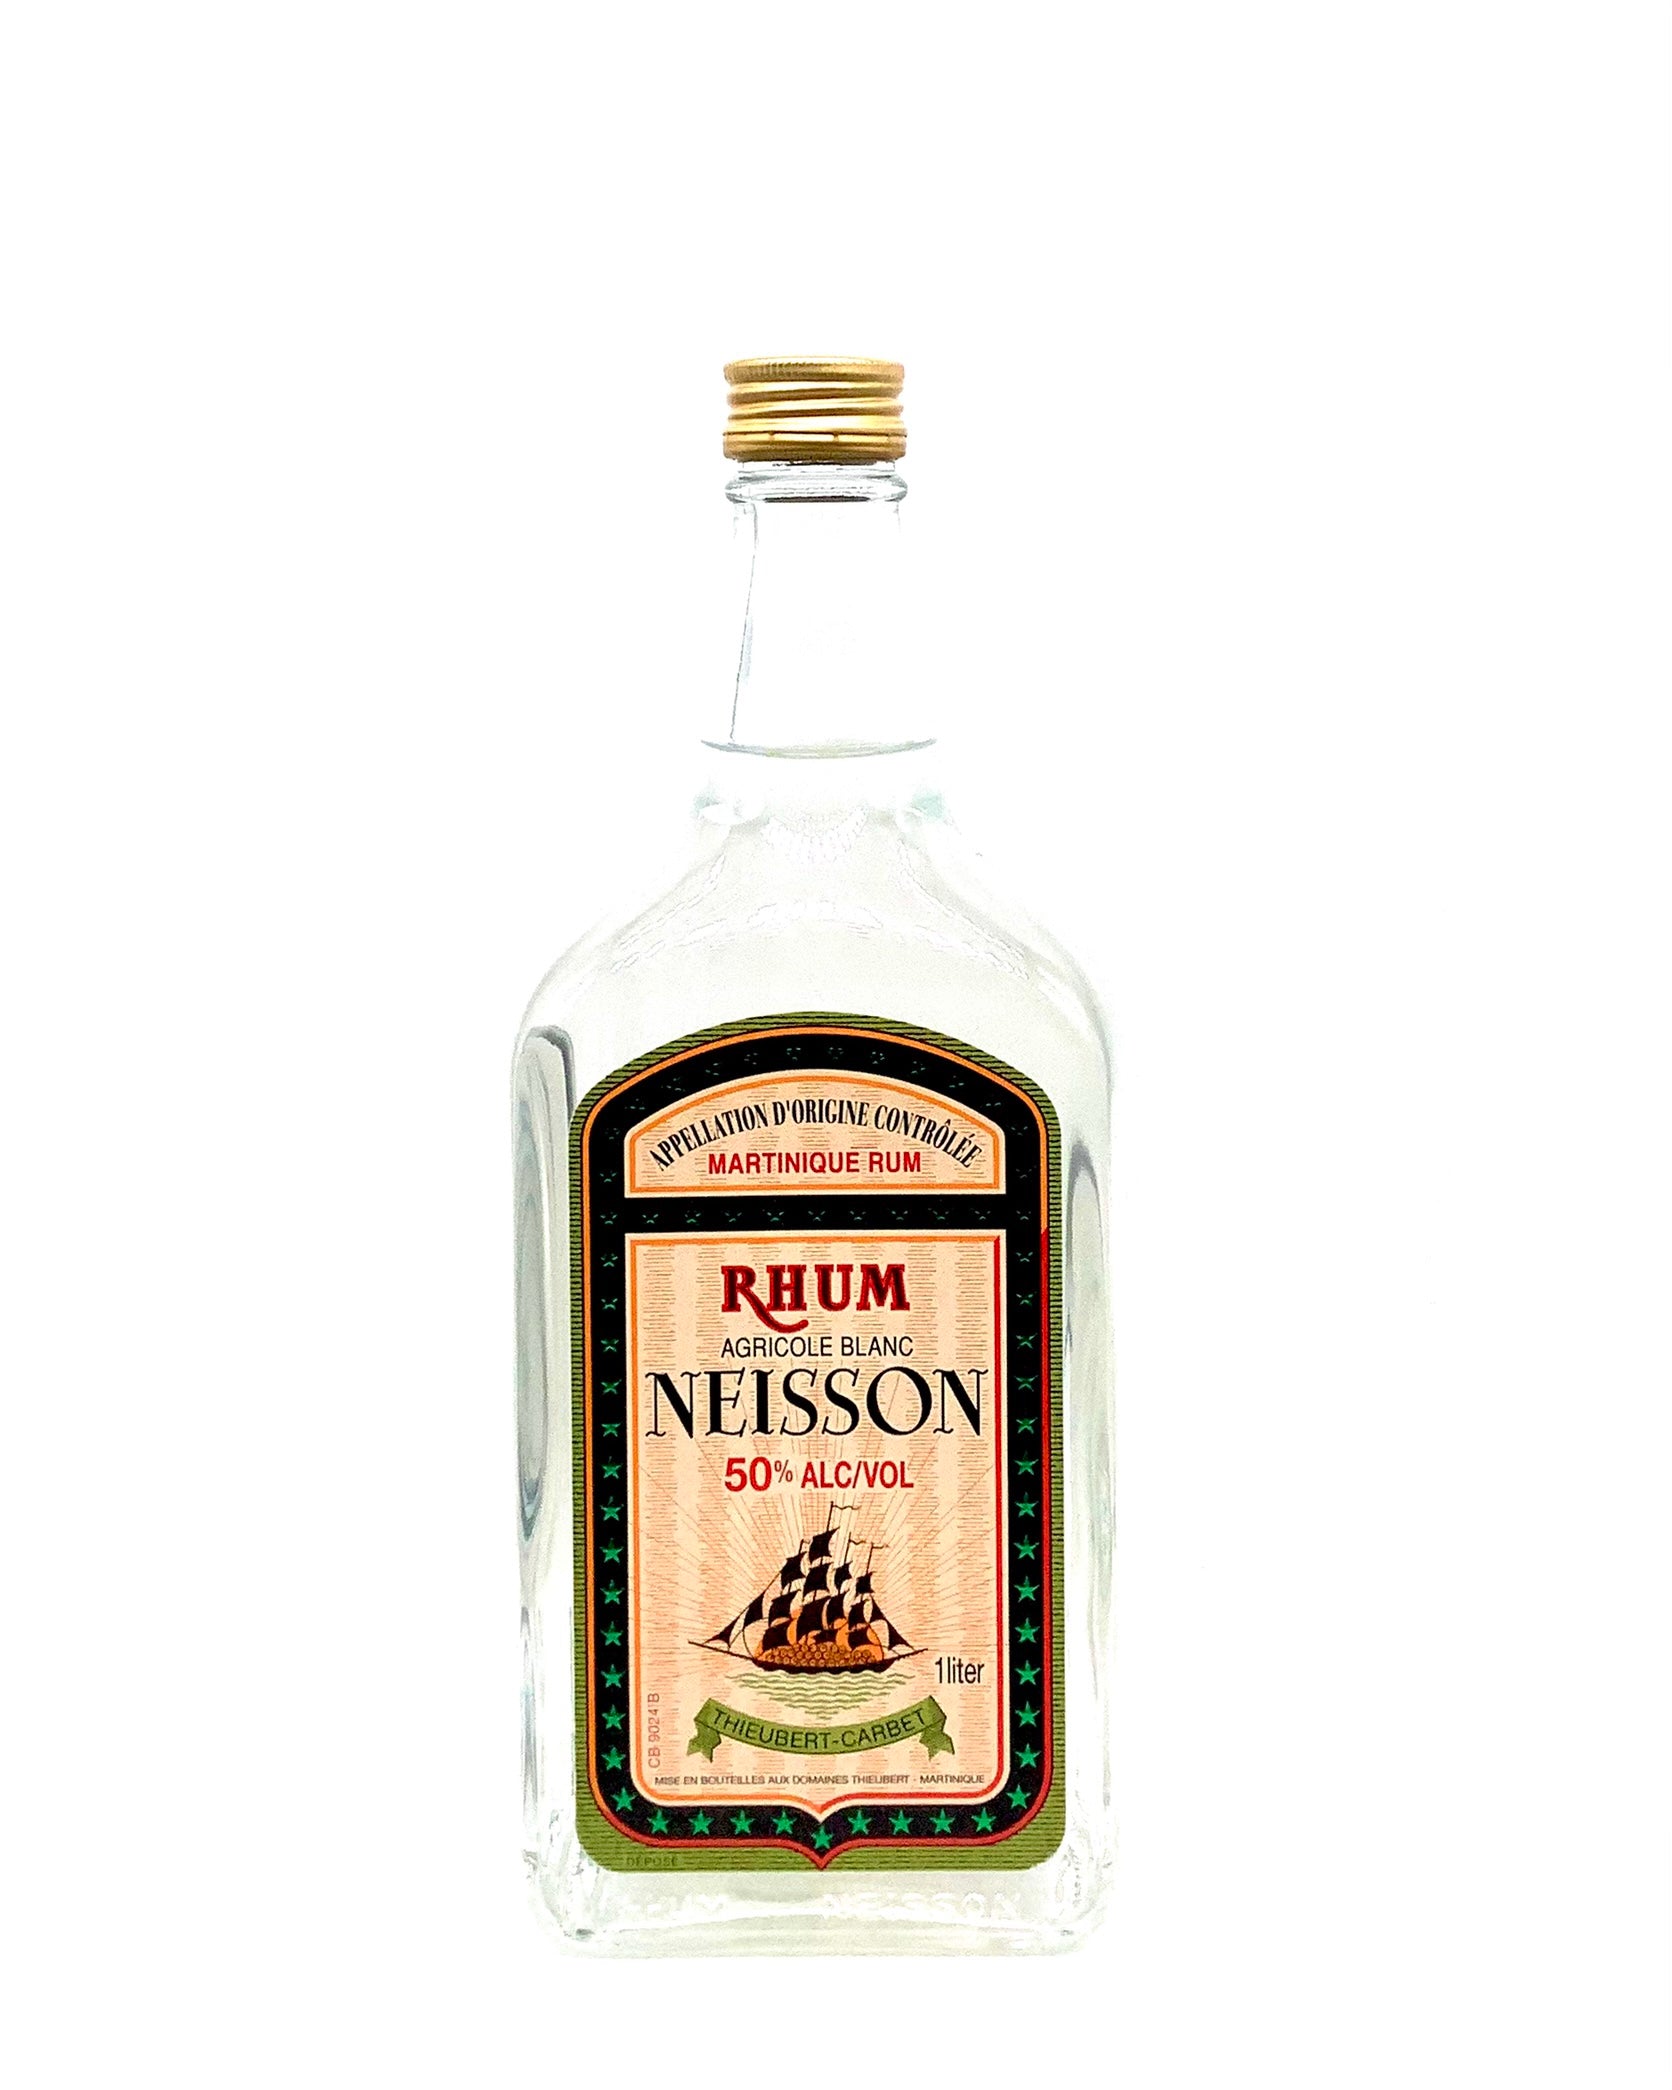 Neisson, Rhum Agricole, Martinique, French West Indies